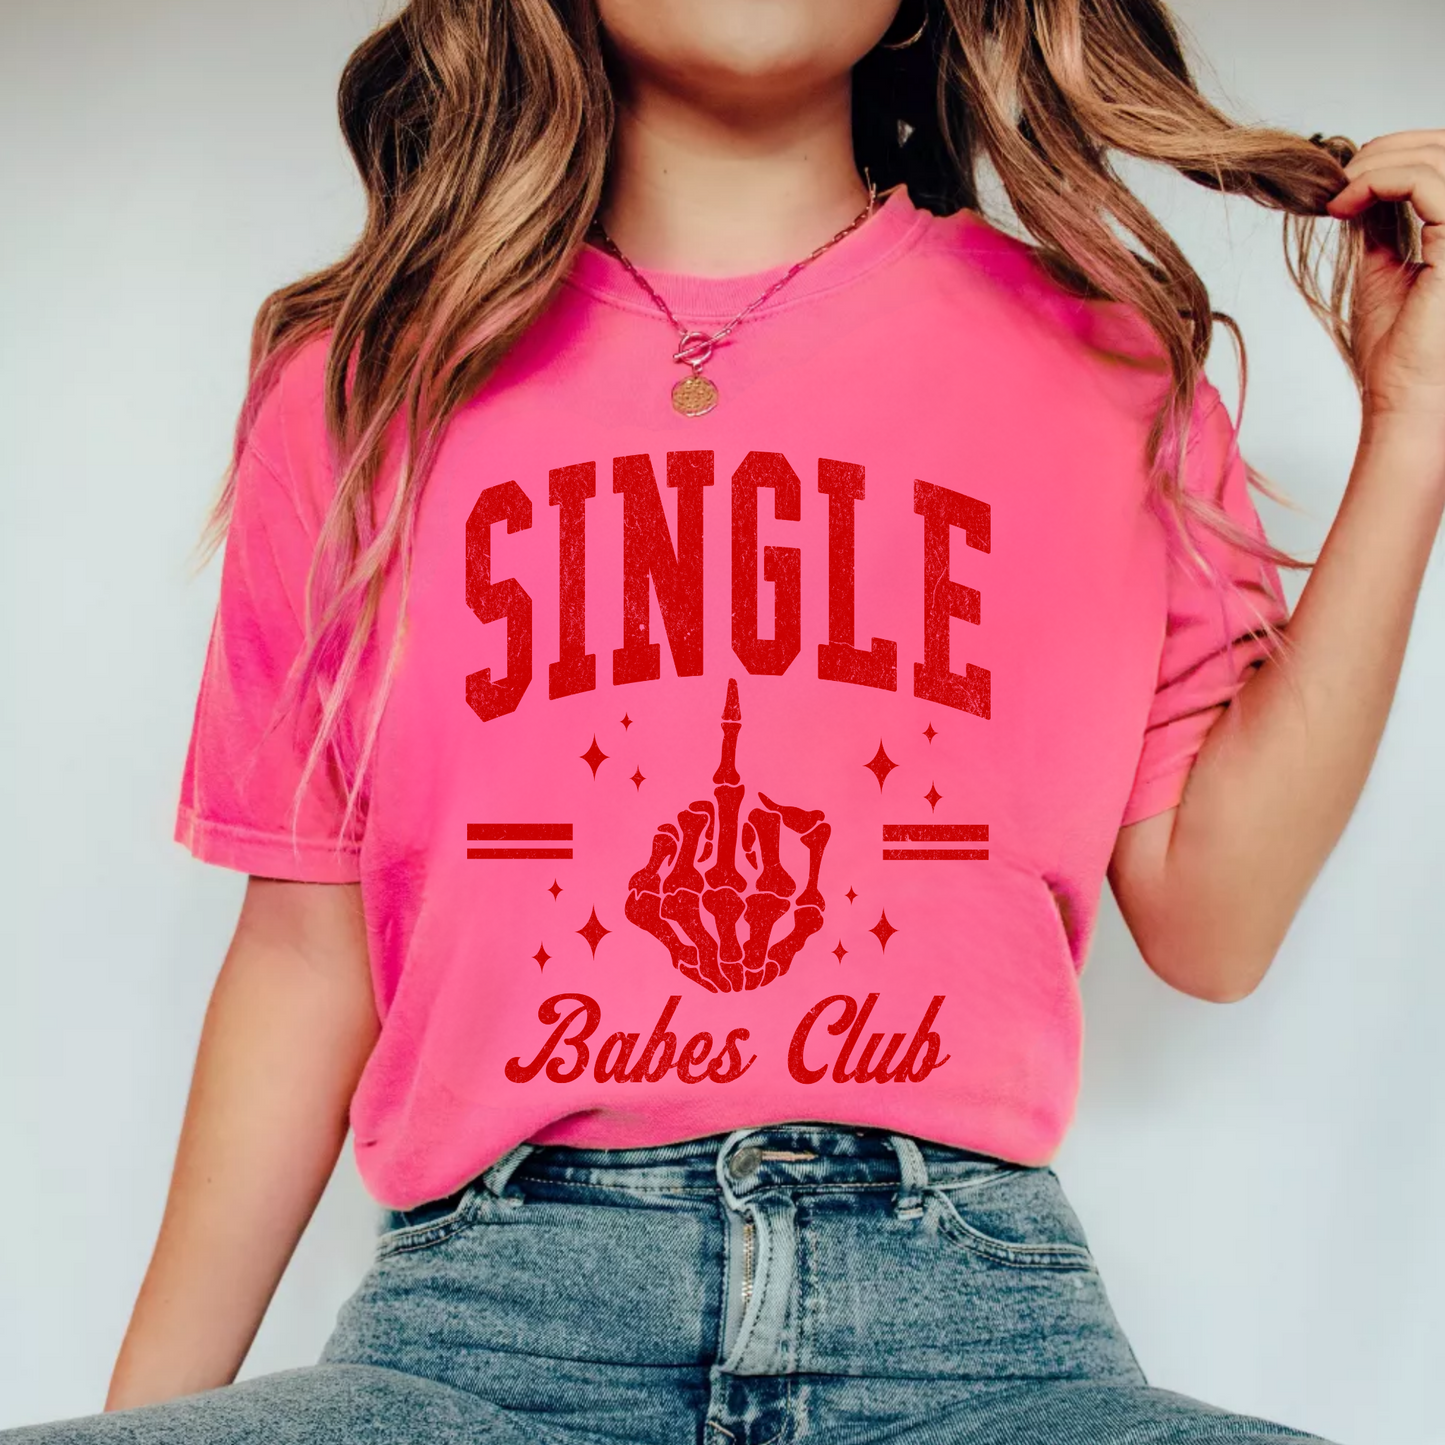 (shirt not included) Single Babes Club in RED- Screen print Transfer